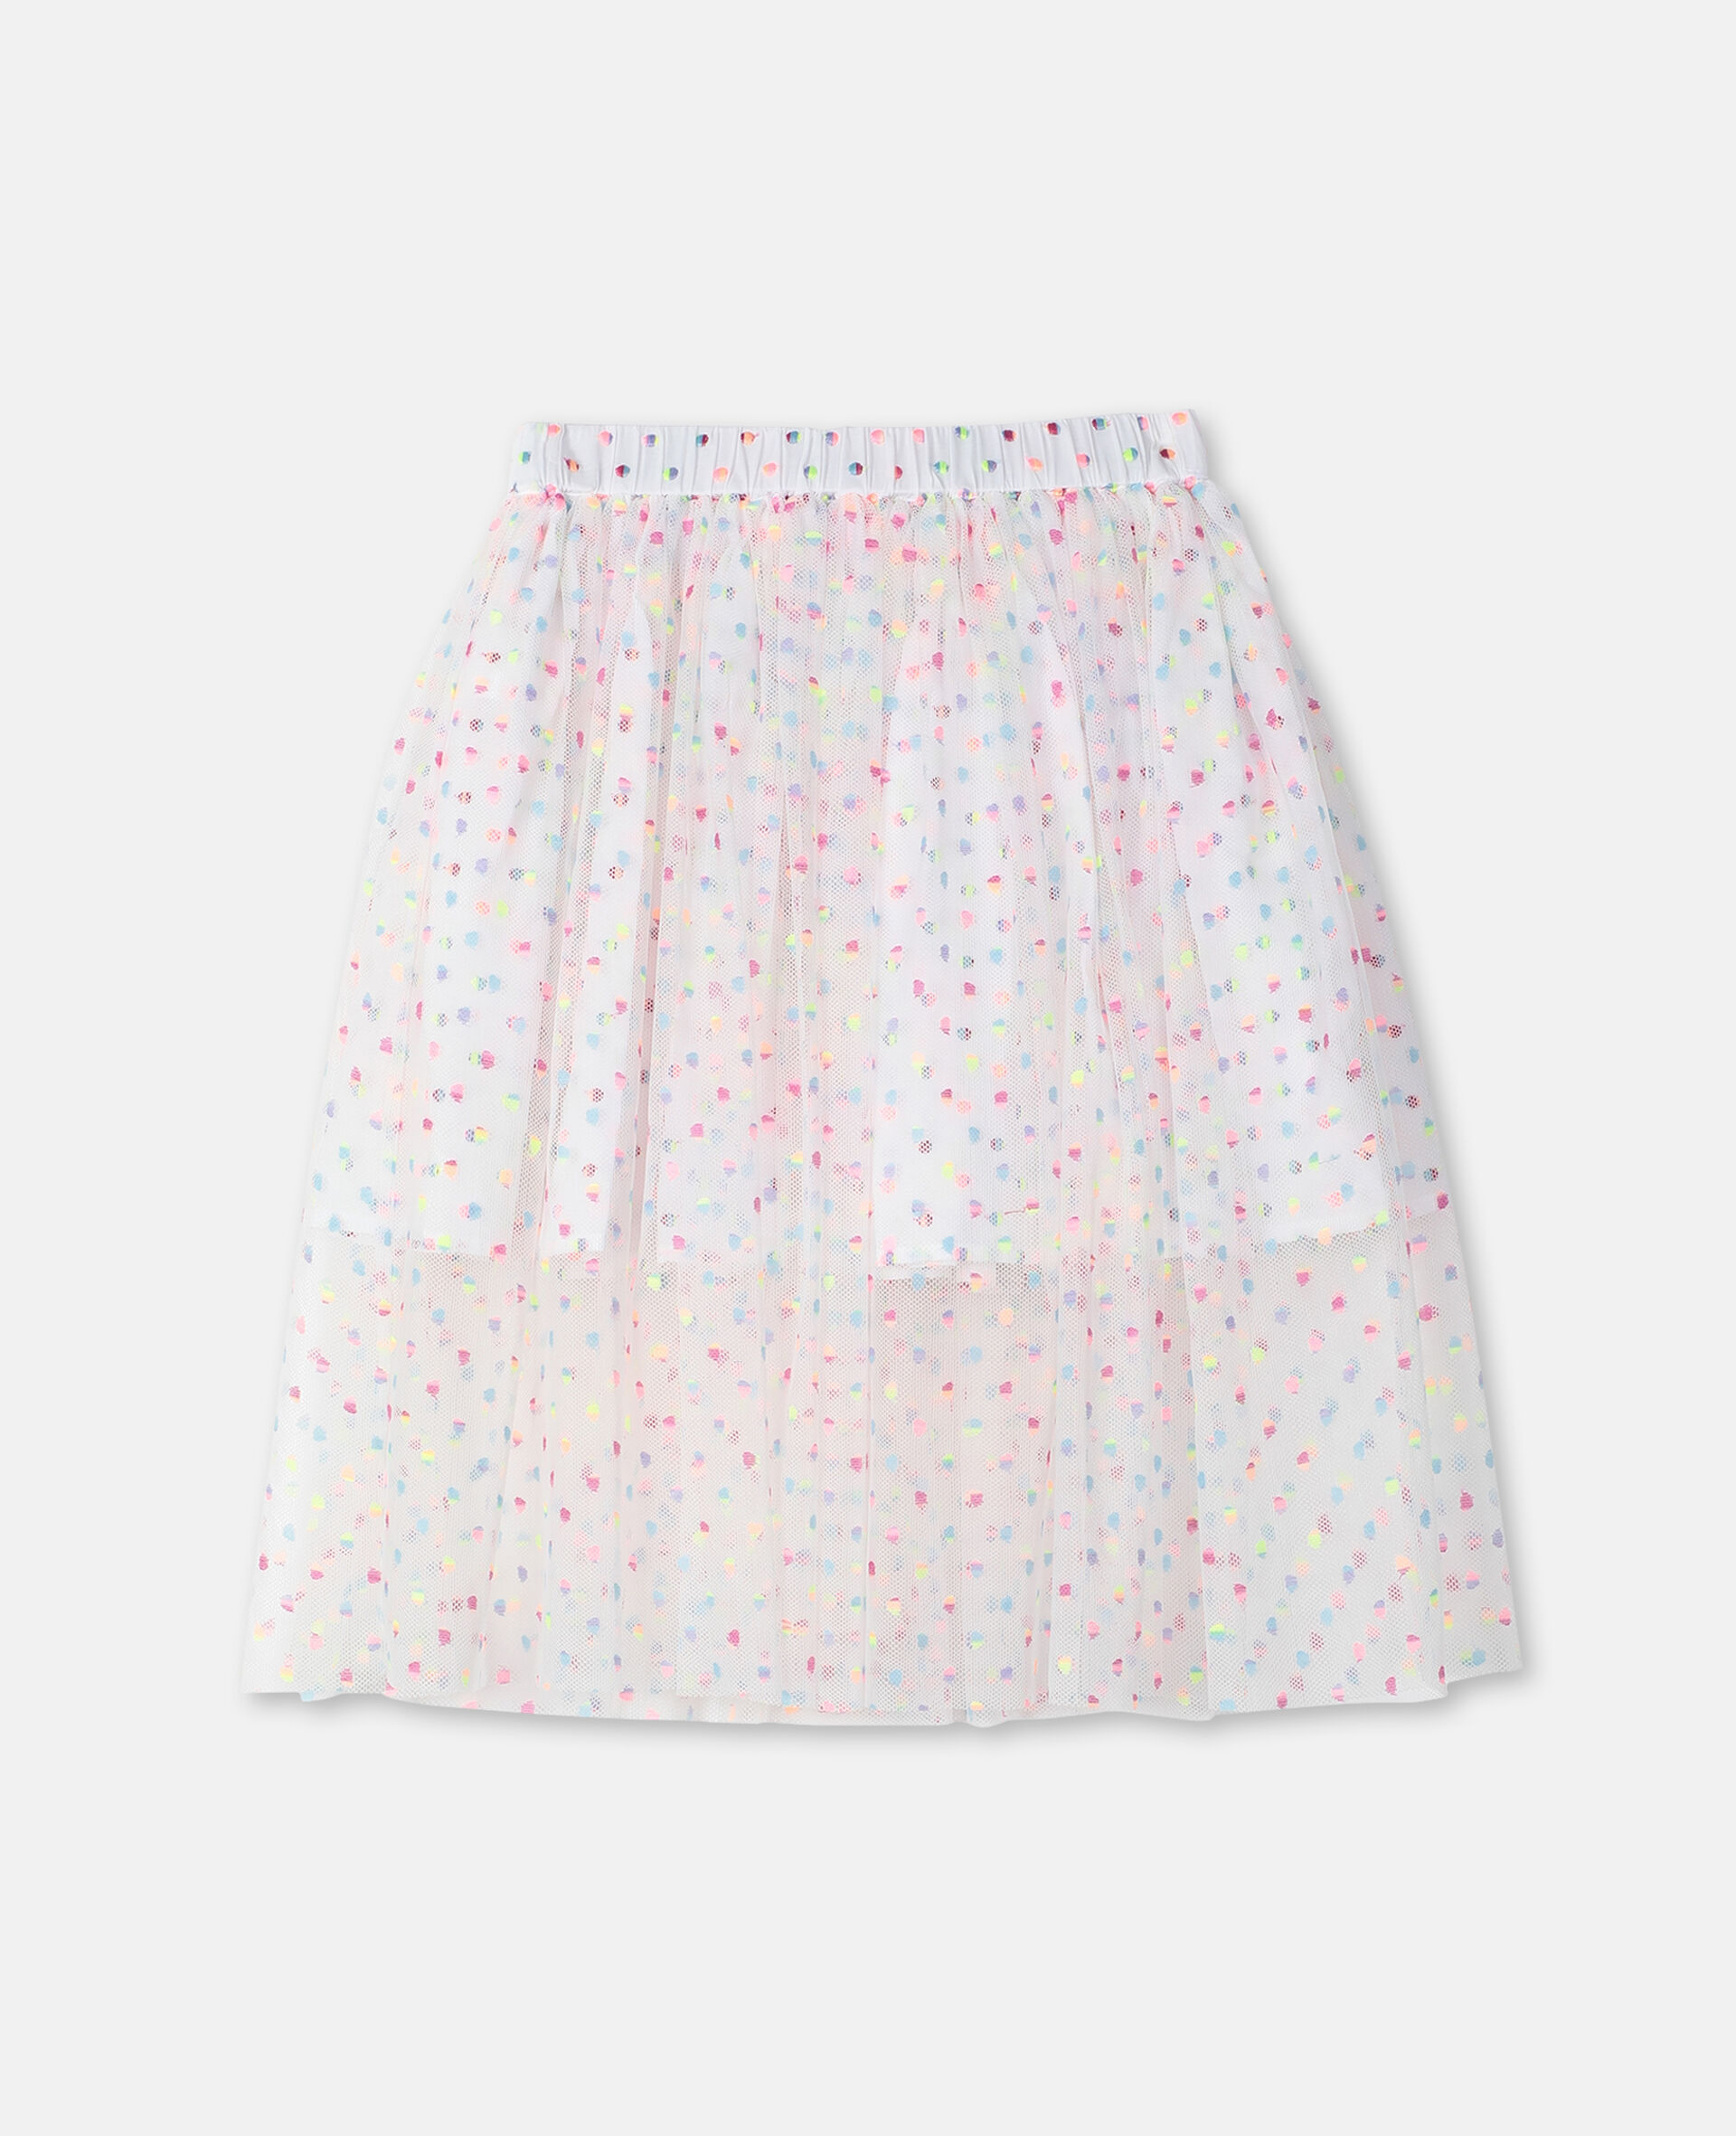 Embroidered Dots Tulle Skirt -Multicolour-large image number 3